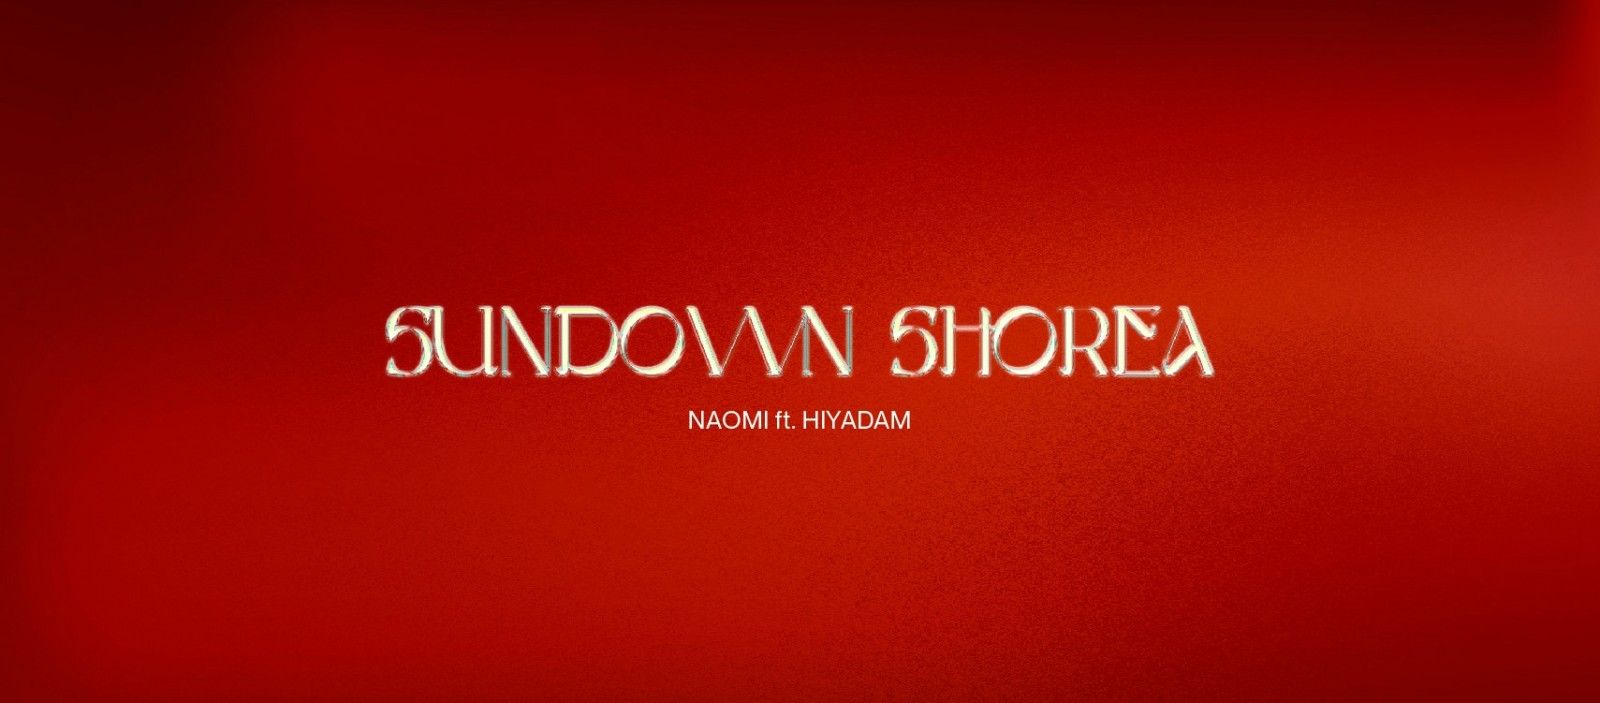 Image of The song Sundown Shorea premieres at the "sunset" of 2020, but will soon shine in the "dawn" of 2021 with Naomi, Rapper HIYADAM and M.A.U Collective